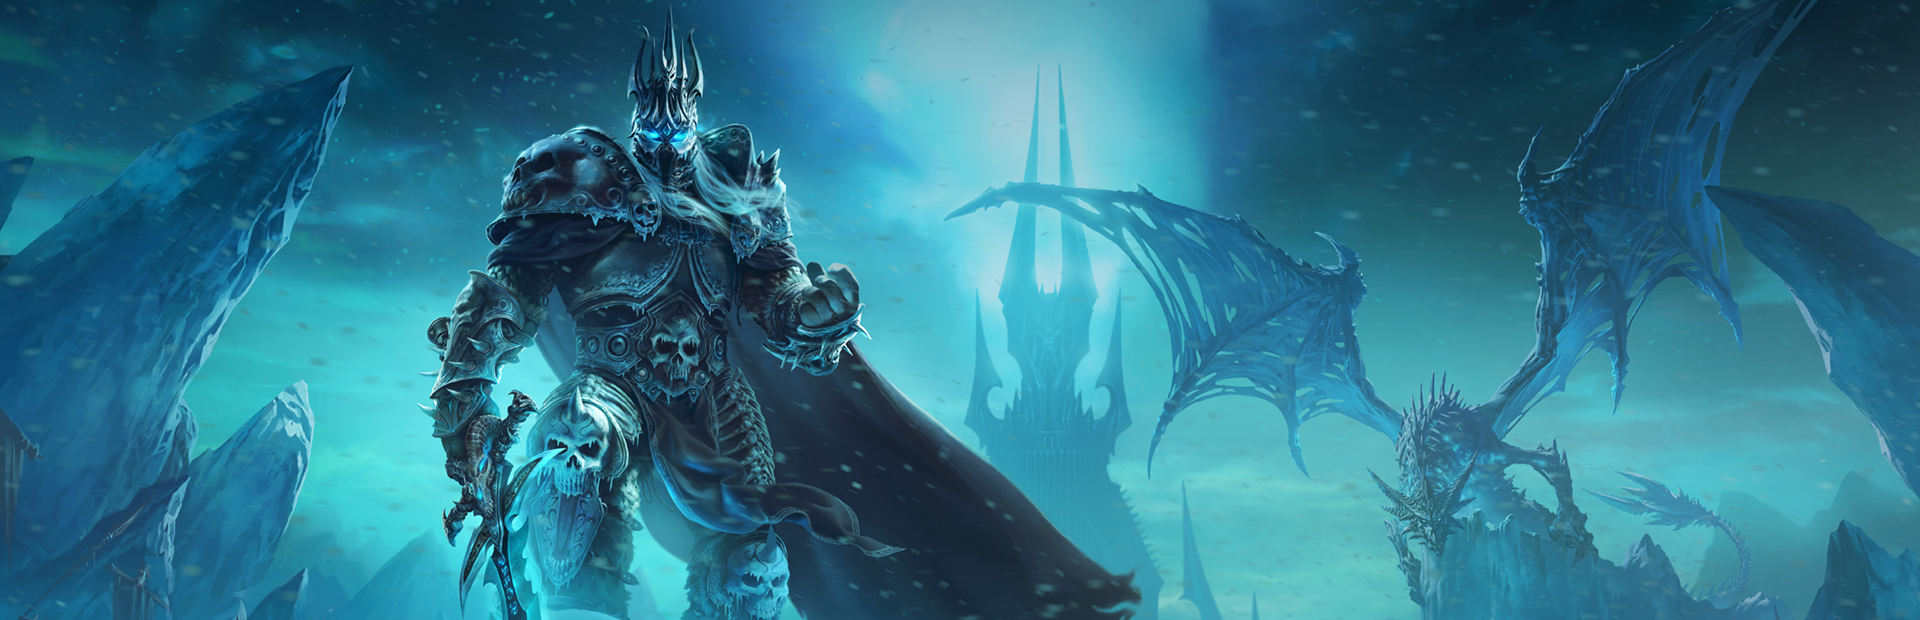 World of Warcraft: Wrath of the Lich King Classic - SteamGridDB